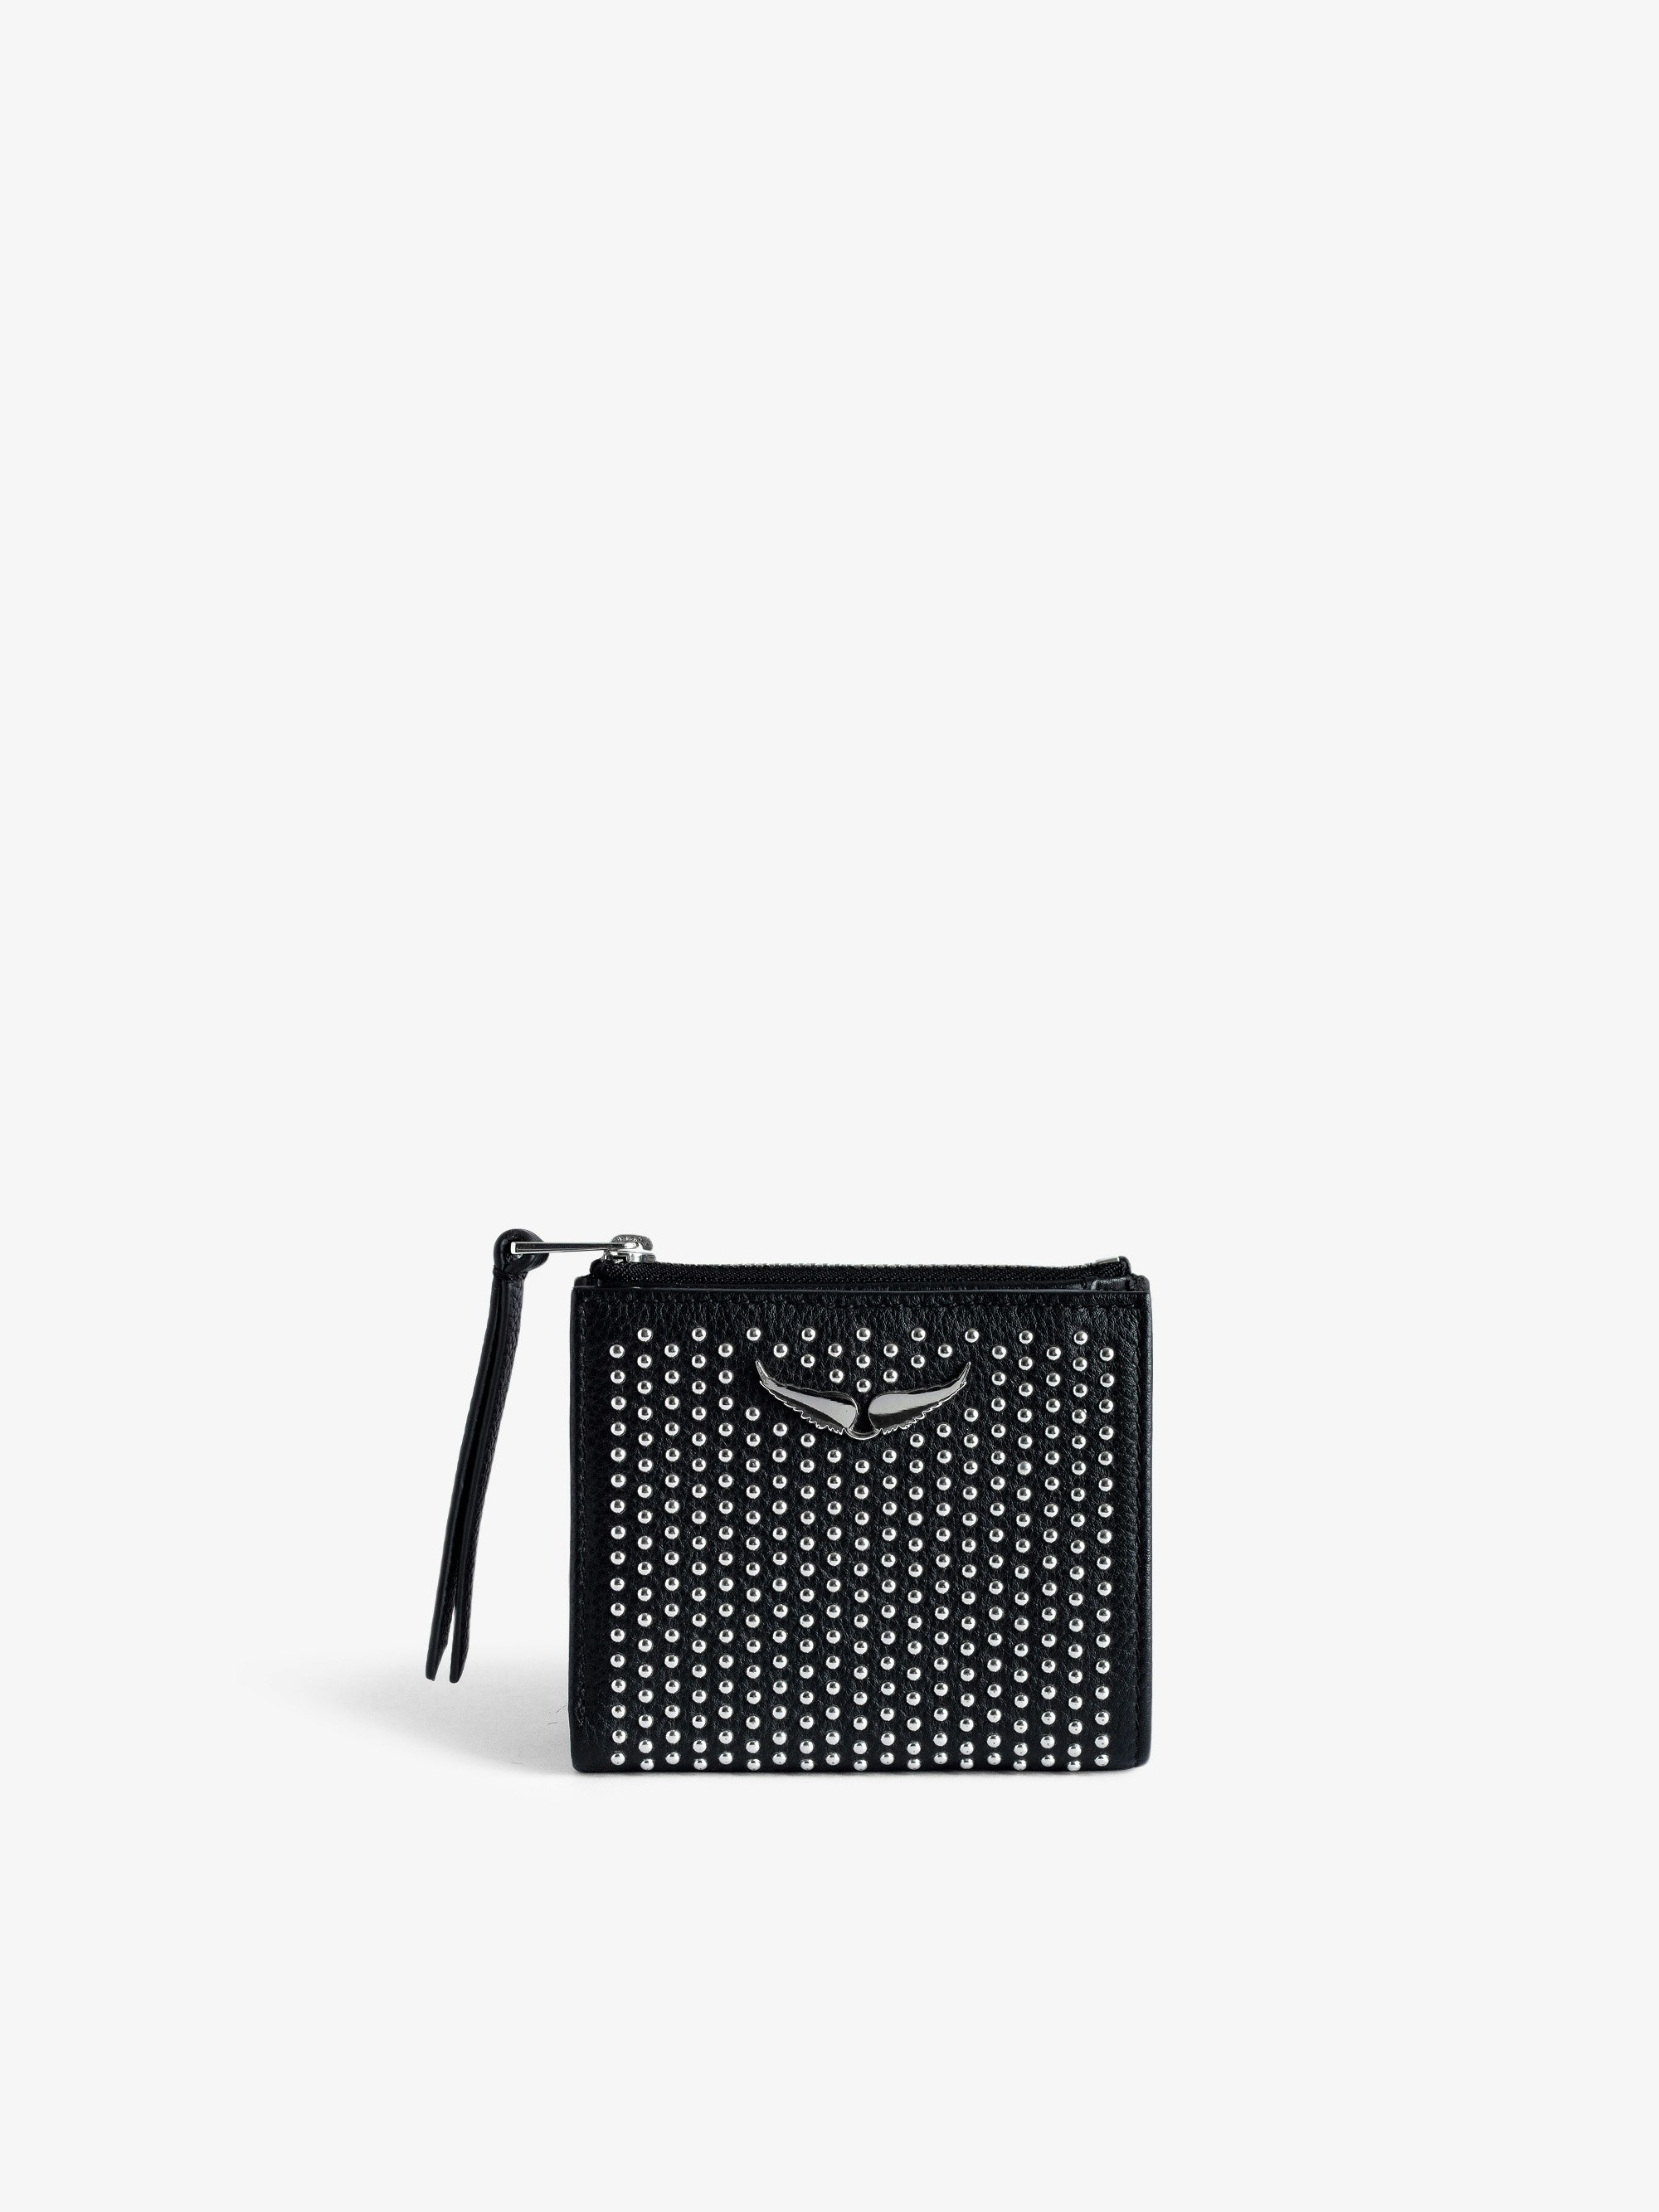 ZV Fold Dotted Swiss Coin Purse - Women’s black grained leather coin purse with studs and wings charm.